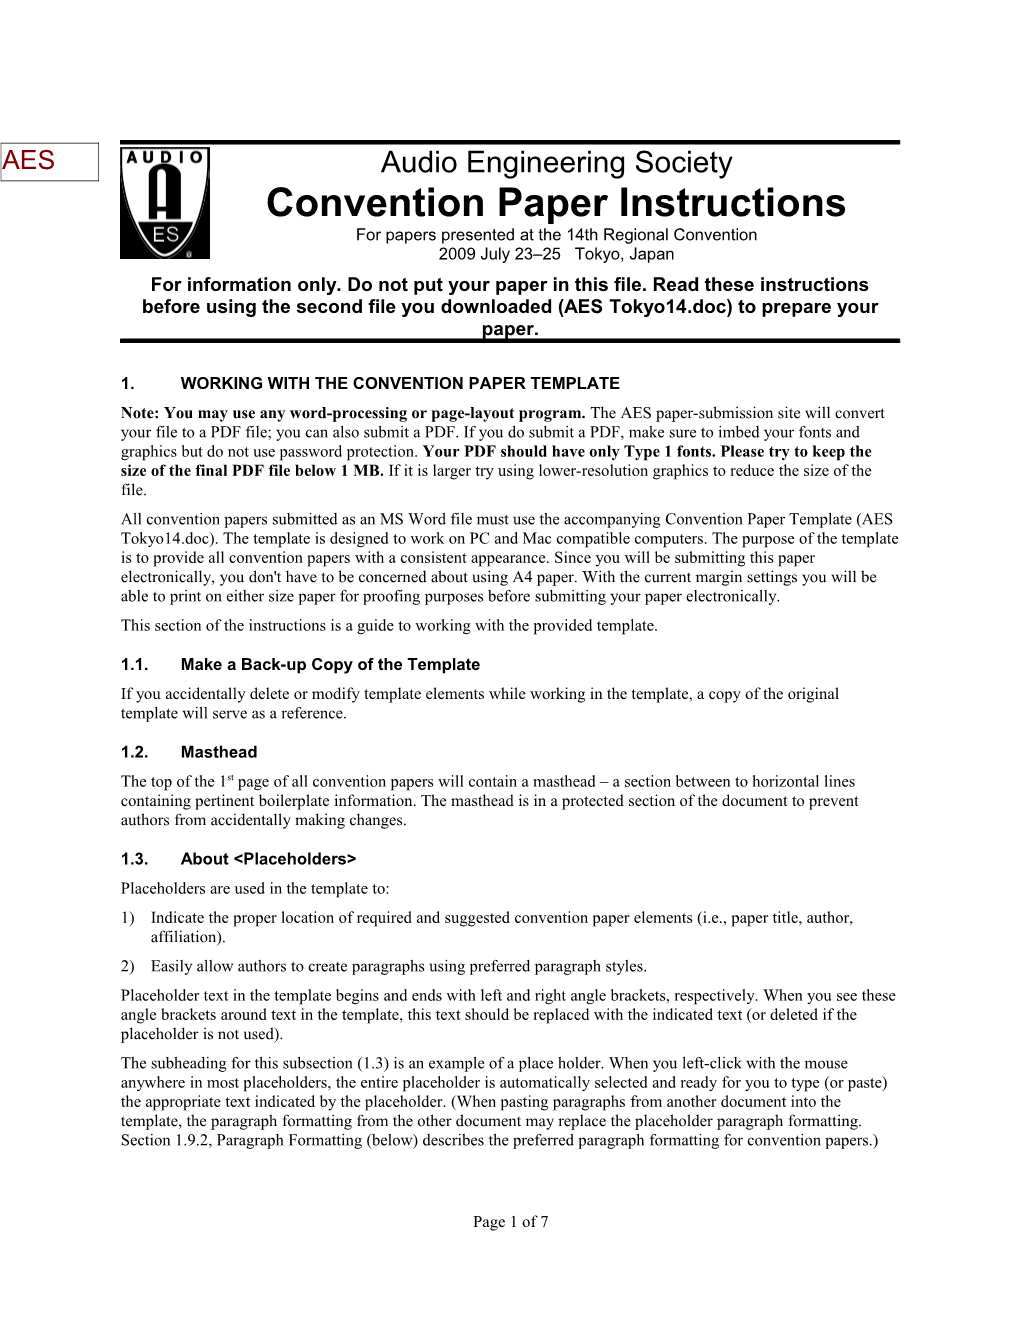 1.Working with the Convention Paper Template